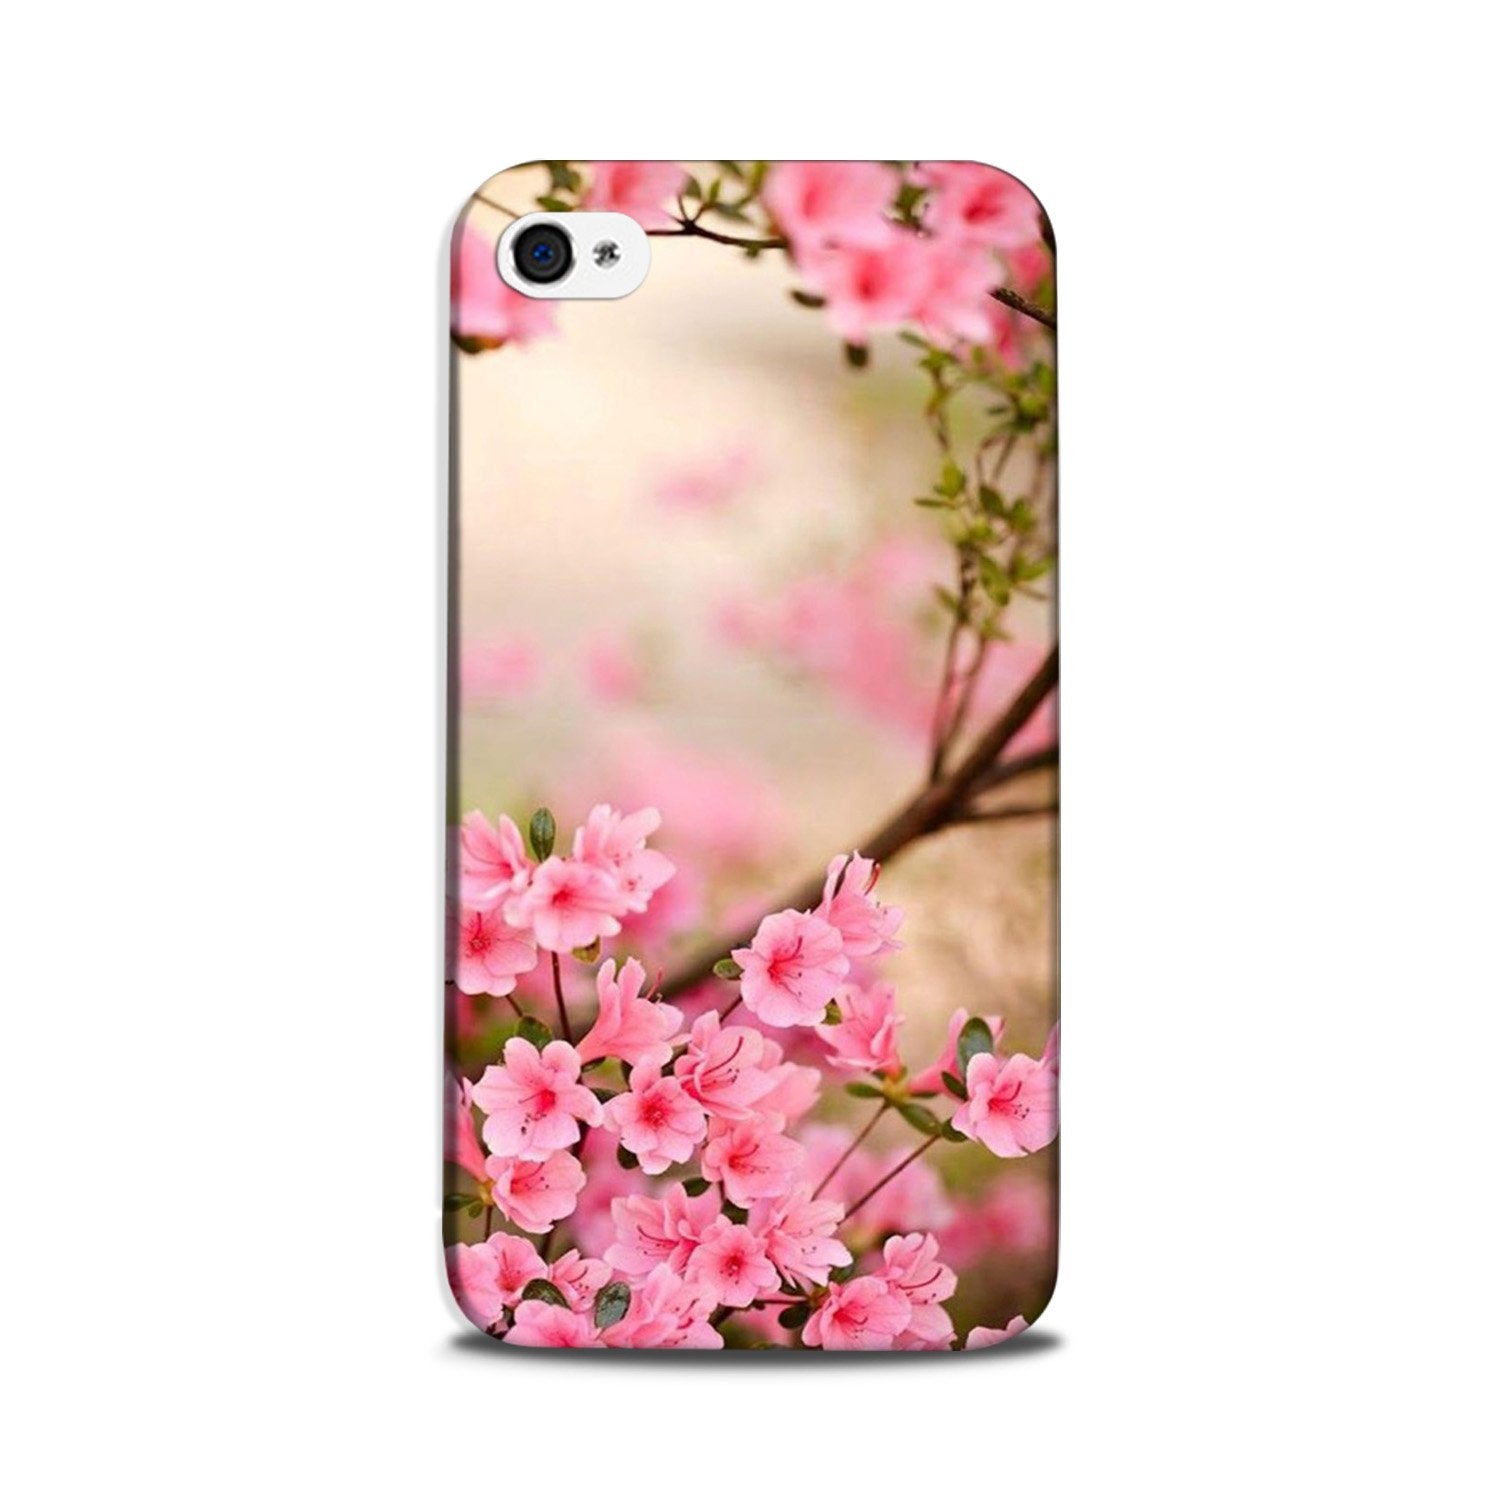 Pink flowers Case for iPhone 5/ 5s